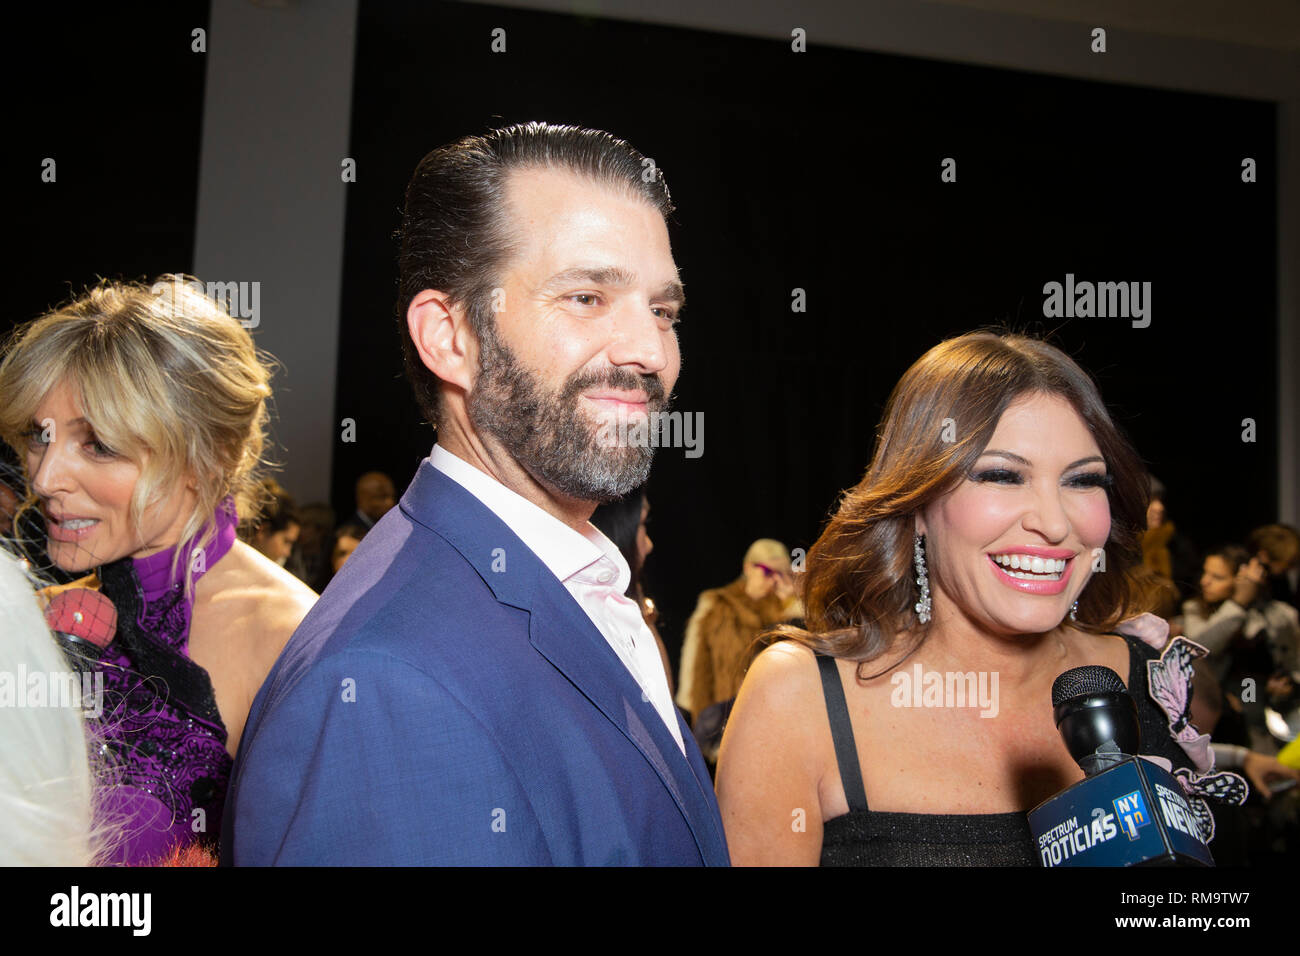 New York, USA - February 13, 2019: Marla Maples, Donald Trump Jr., Kimberly Guilfoyle attend runway for Zang Toi Fall/Winter collection during New York Fashion Week at Spring Studios Credit: lev radin/Alamy Live News Stock Photo